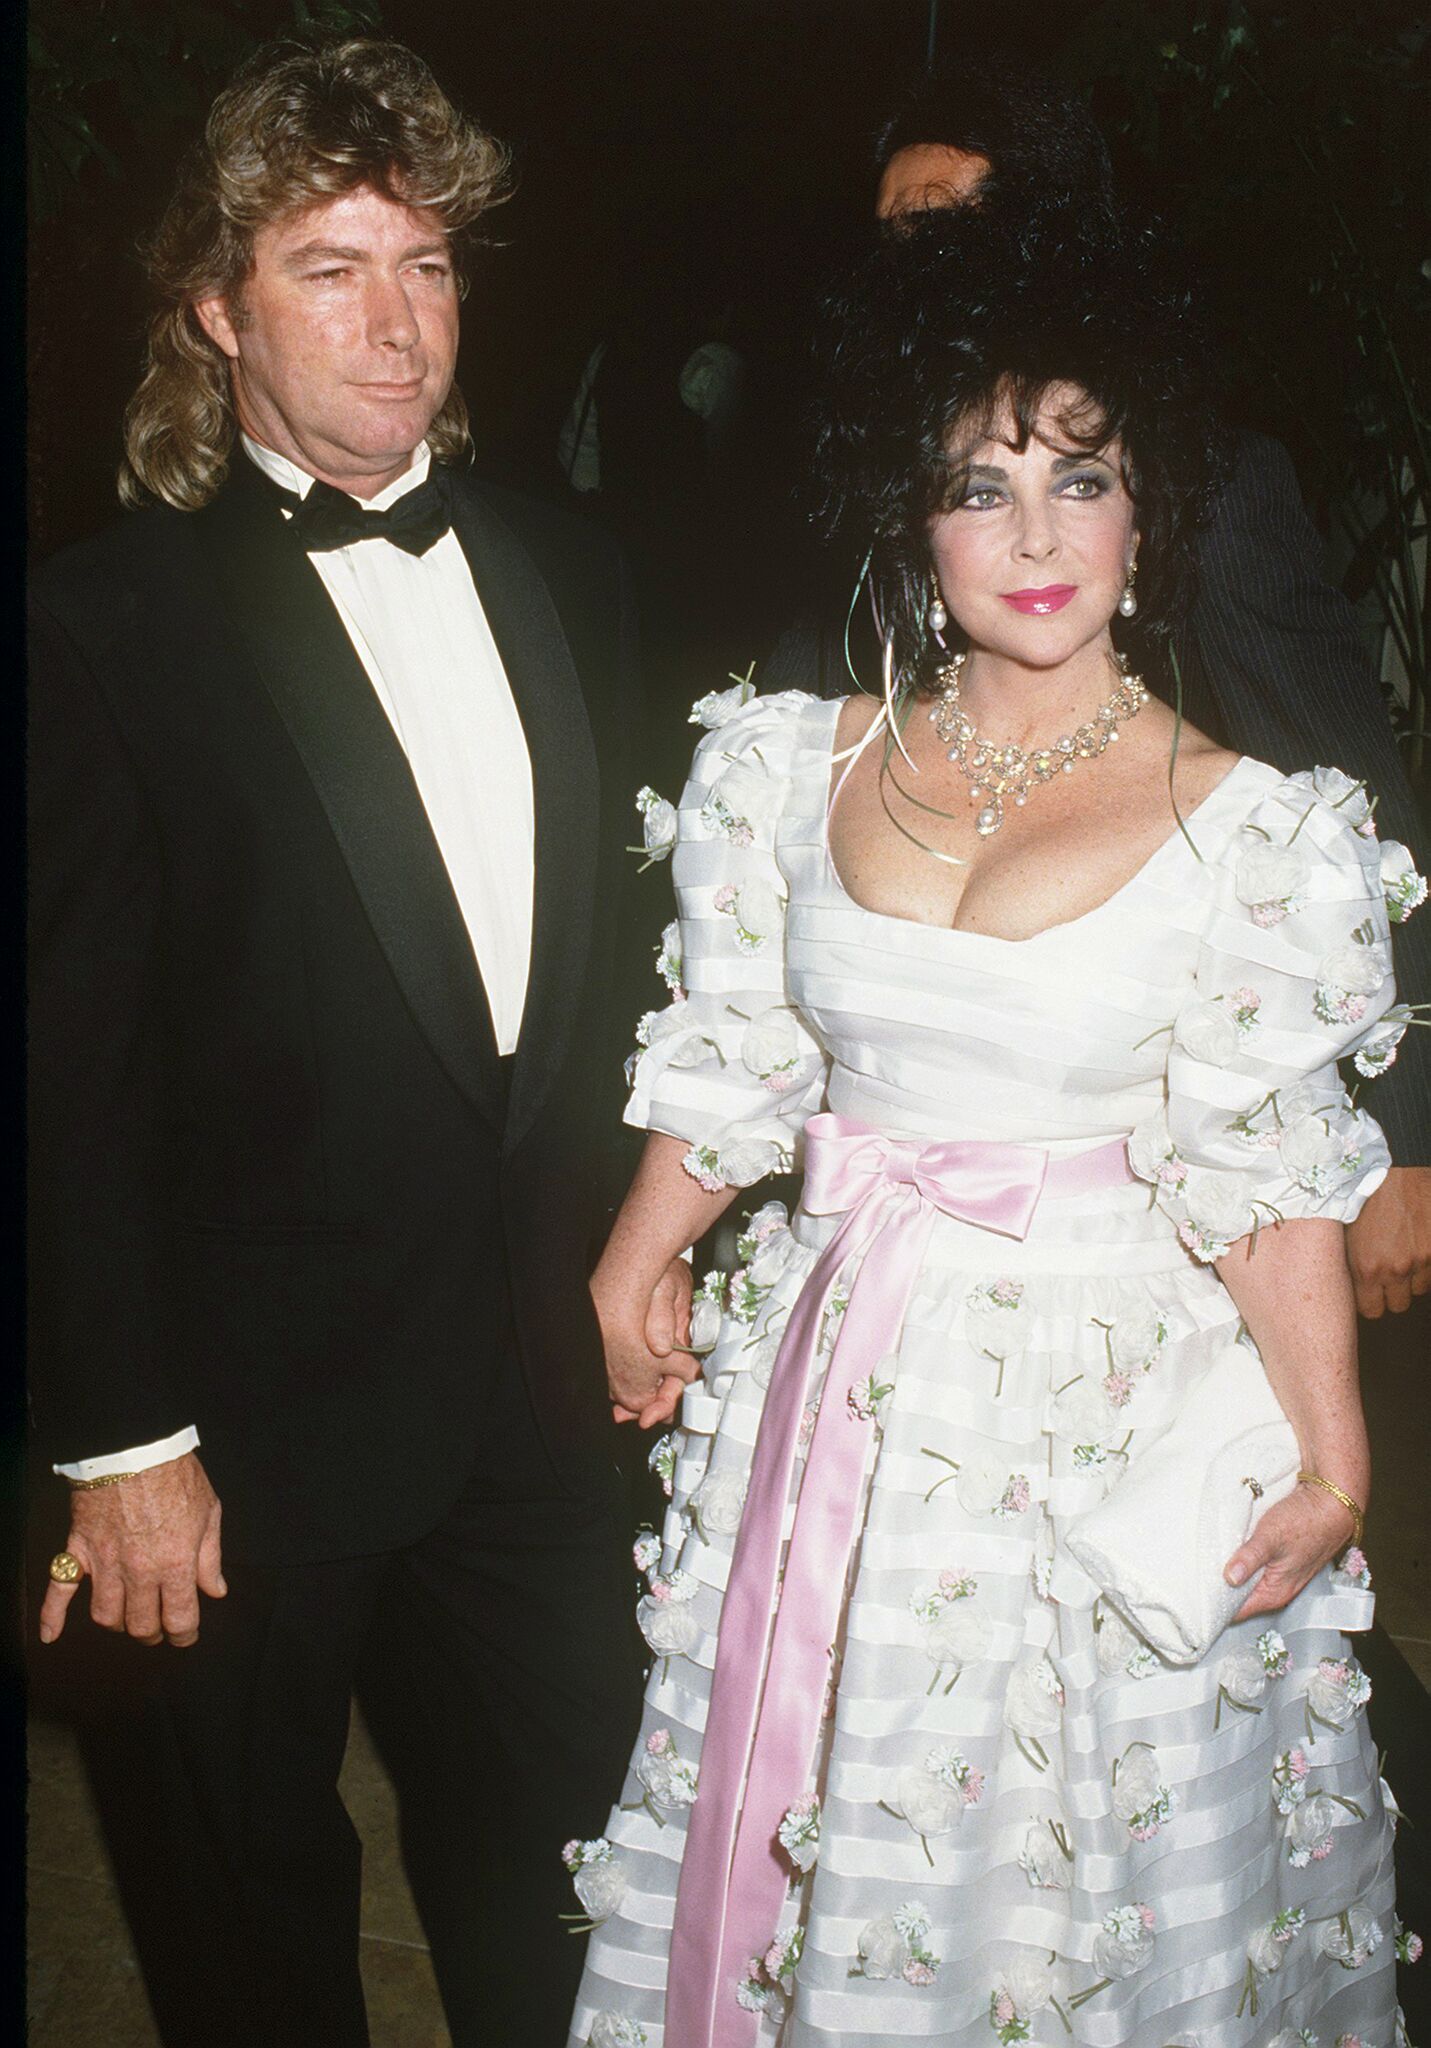 Elizabeth Taylor (1932 - 2011) and her husband Larry Fortensky attending the Carousel of Hope at the Beverly Hilton Hotel | Getty Images